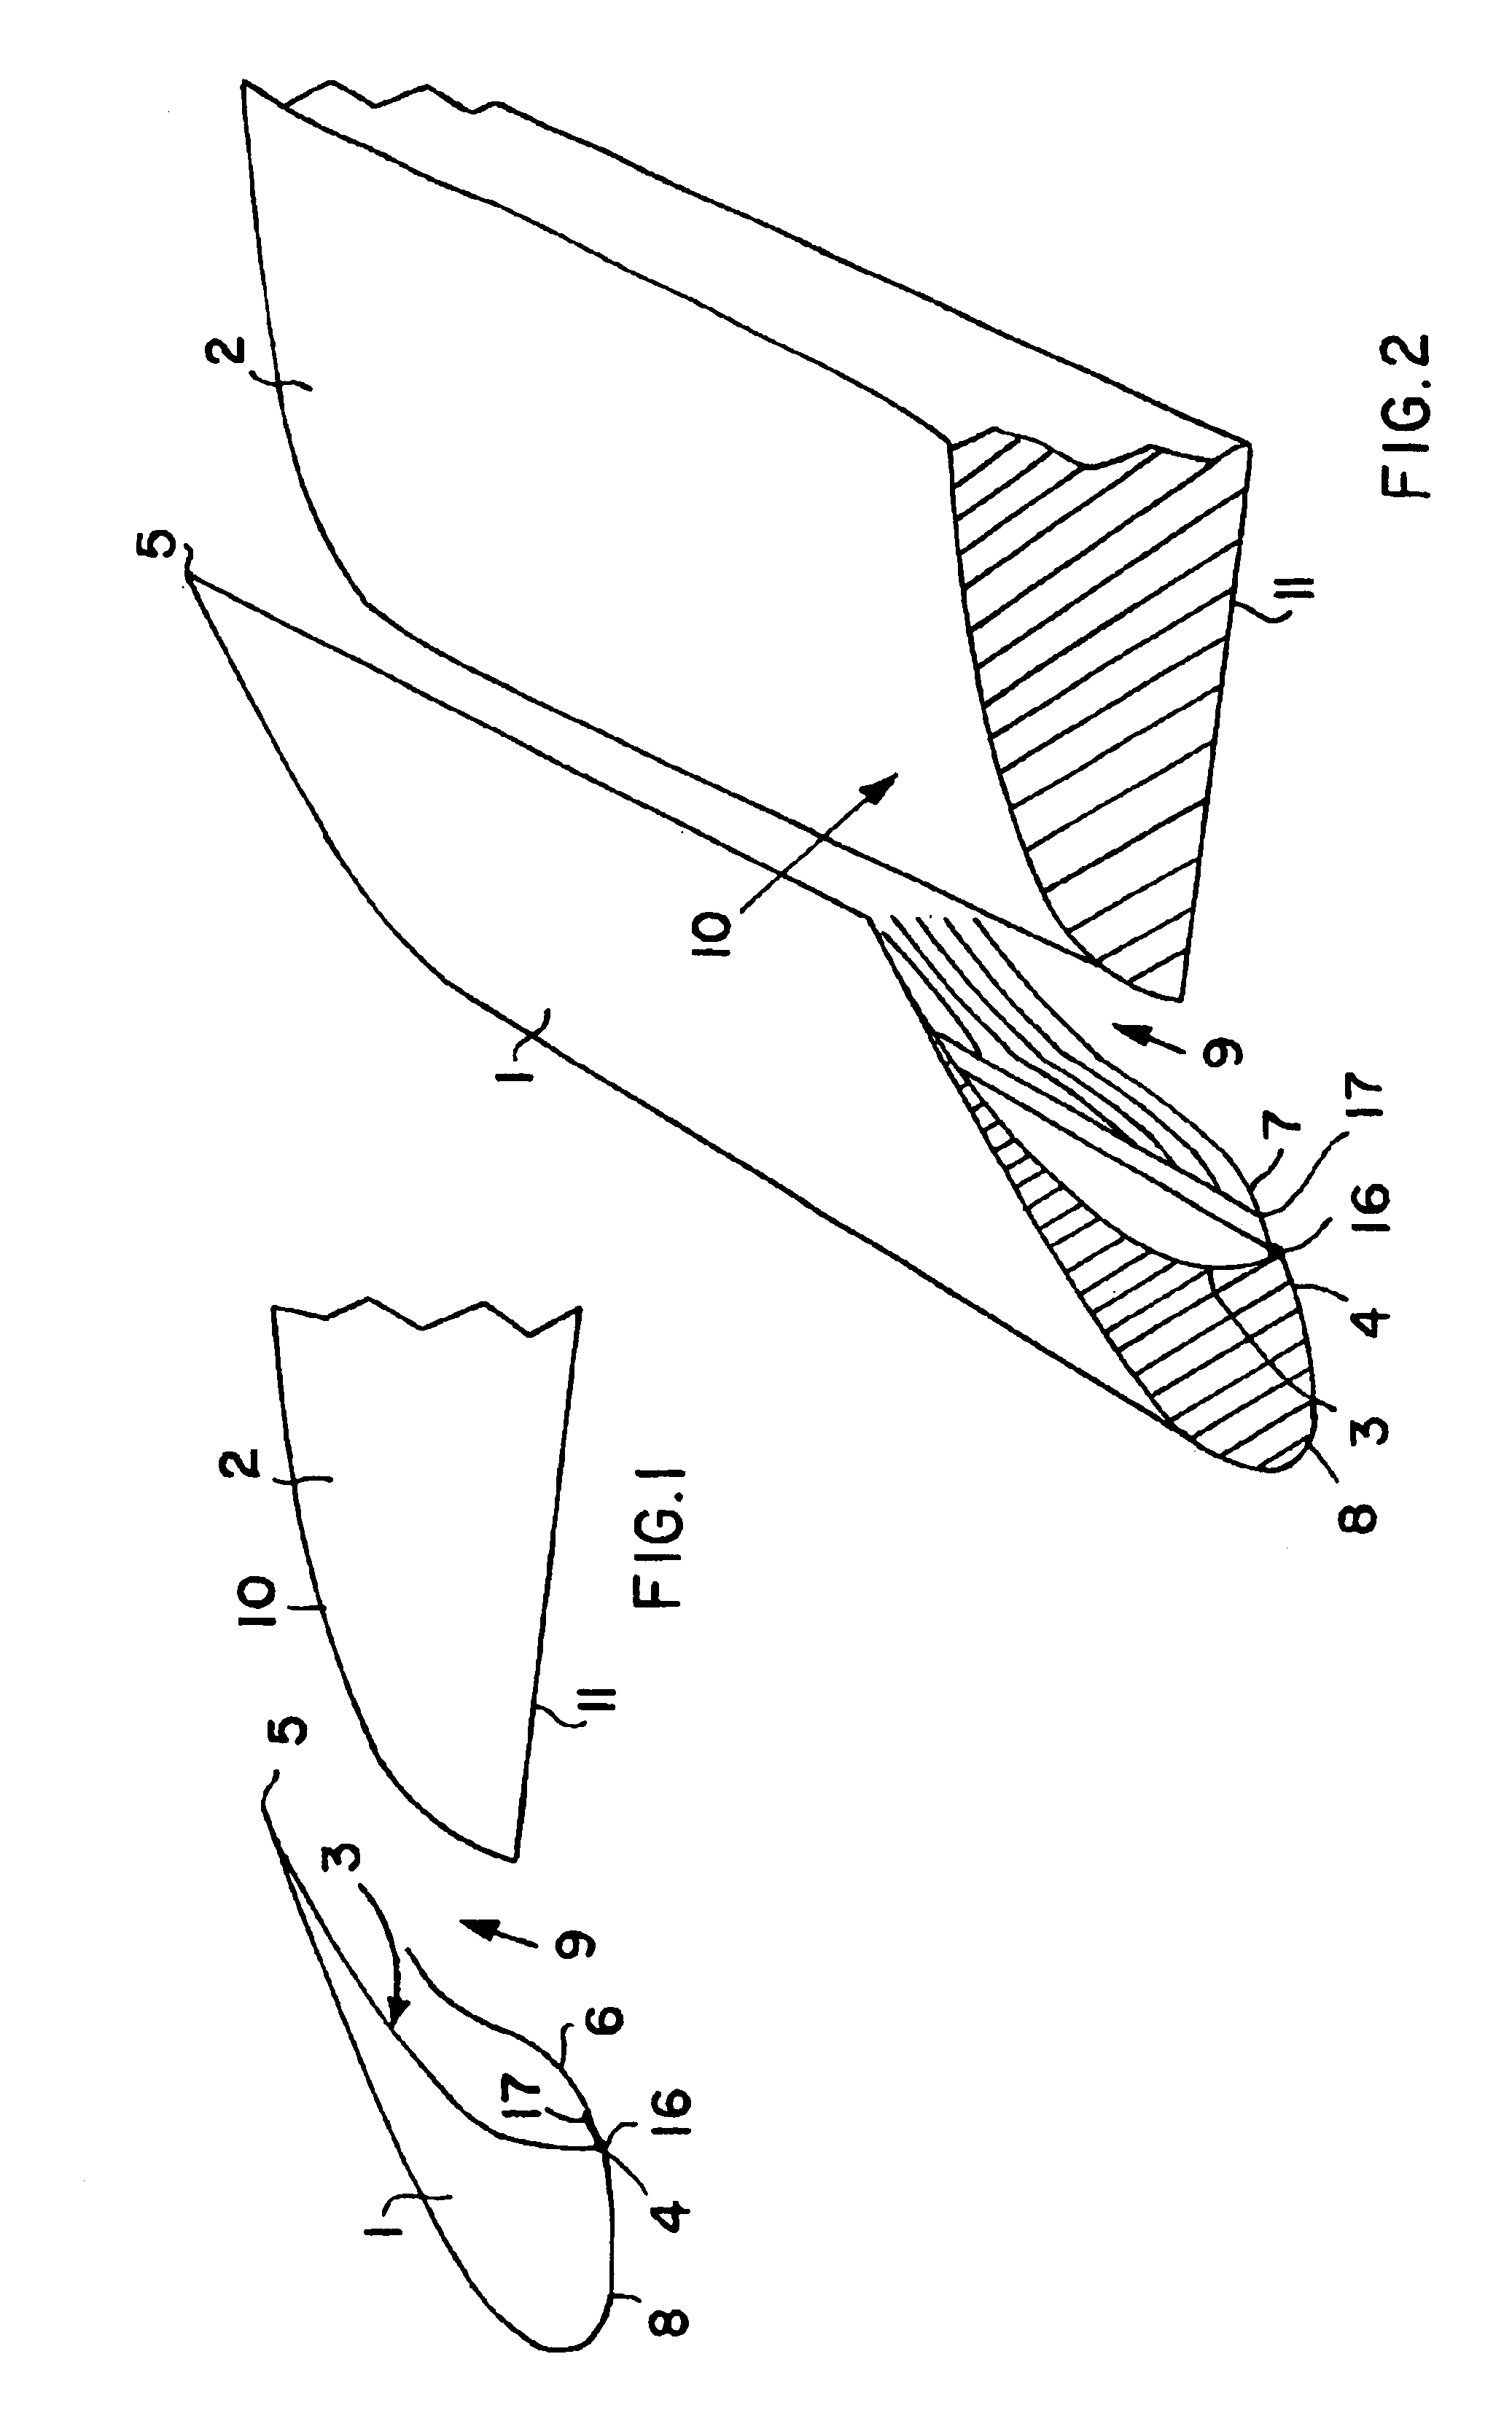 Flexible airflow separator to reduce aerodynamic noise generated by a leading edge slat of an aircraft wing